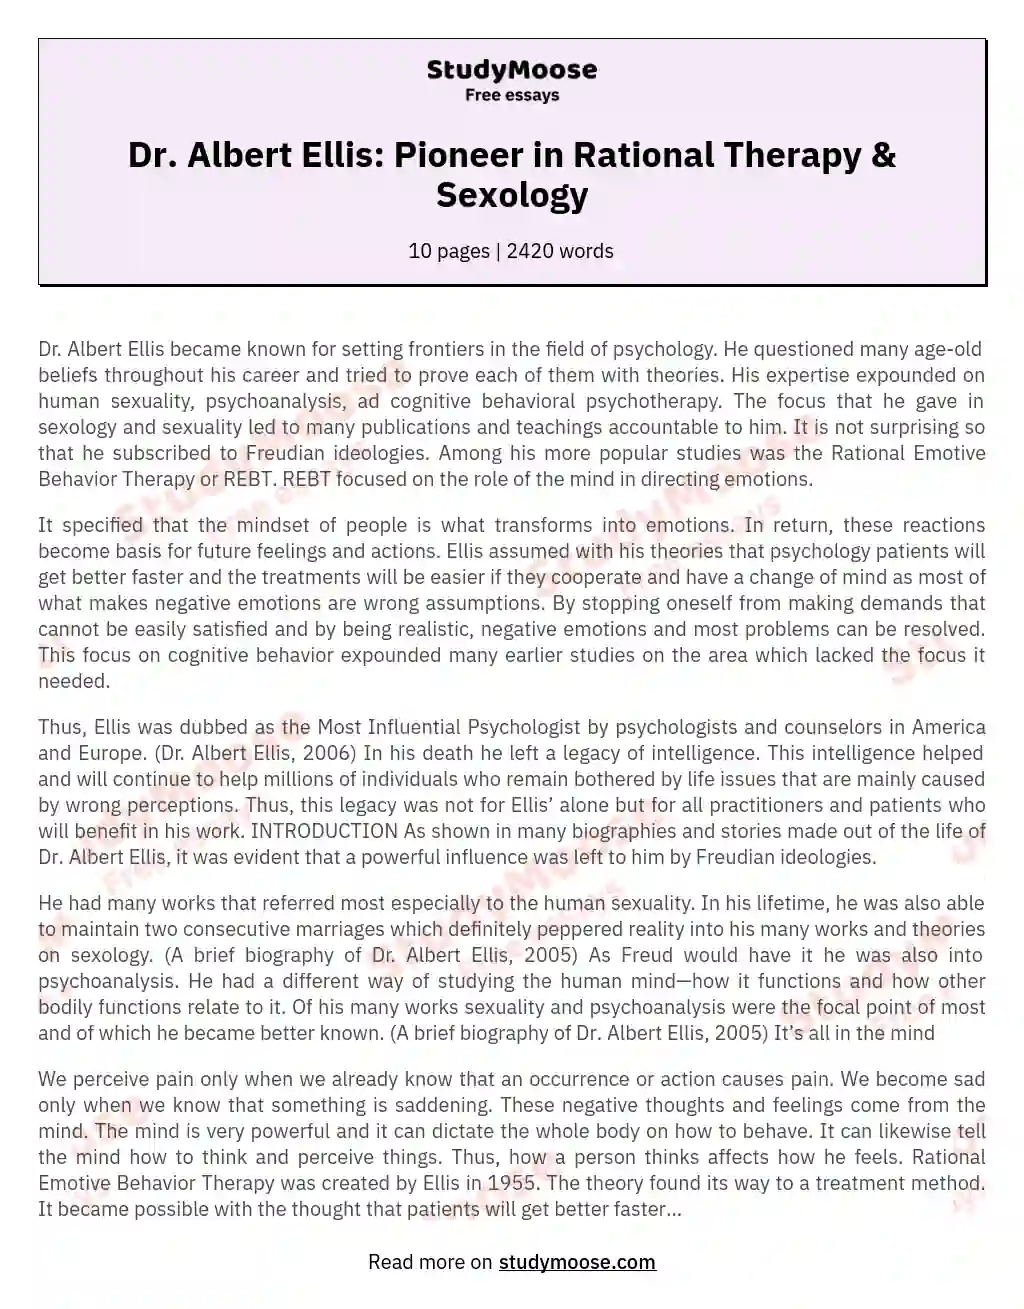 Dr. Albert Ellis: Pioneer in Rational Therapy & Sexology essay